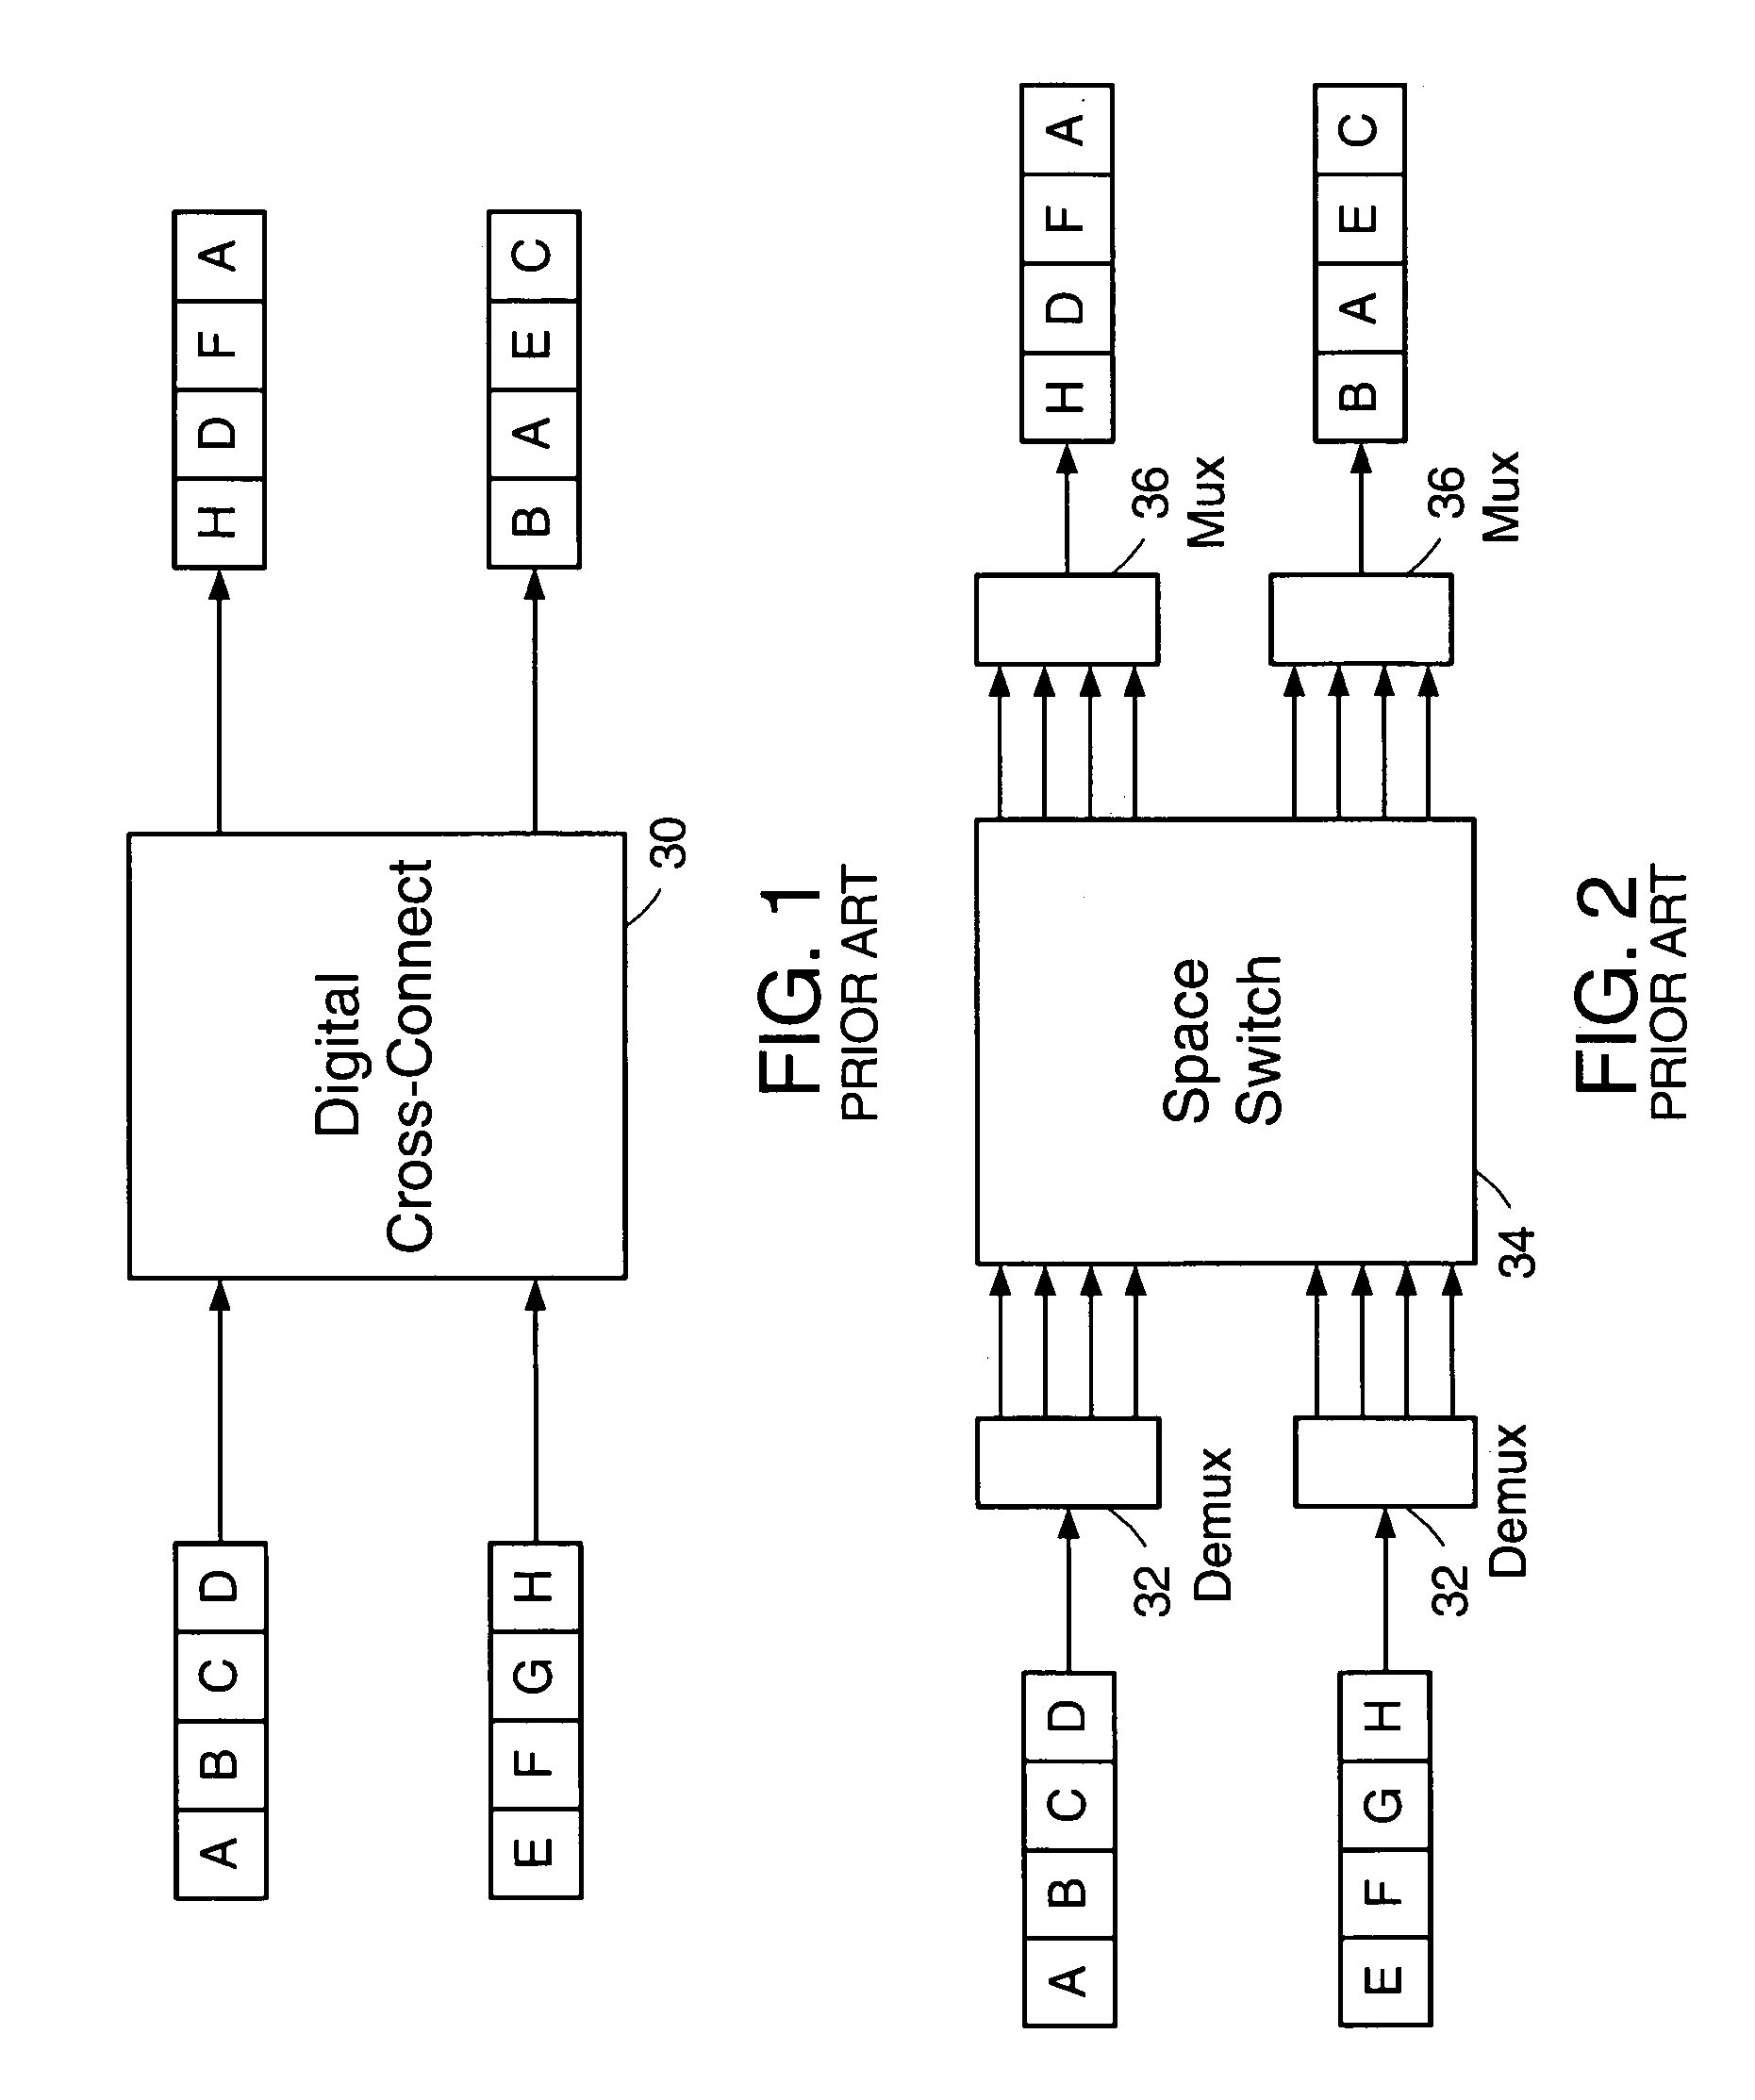 Multistage digital cross connect with synchronized configuration switching